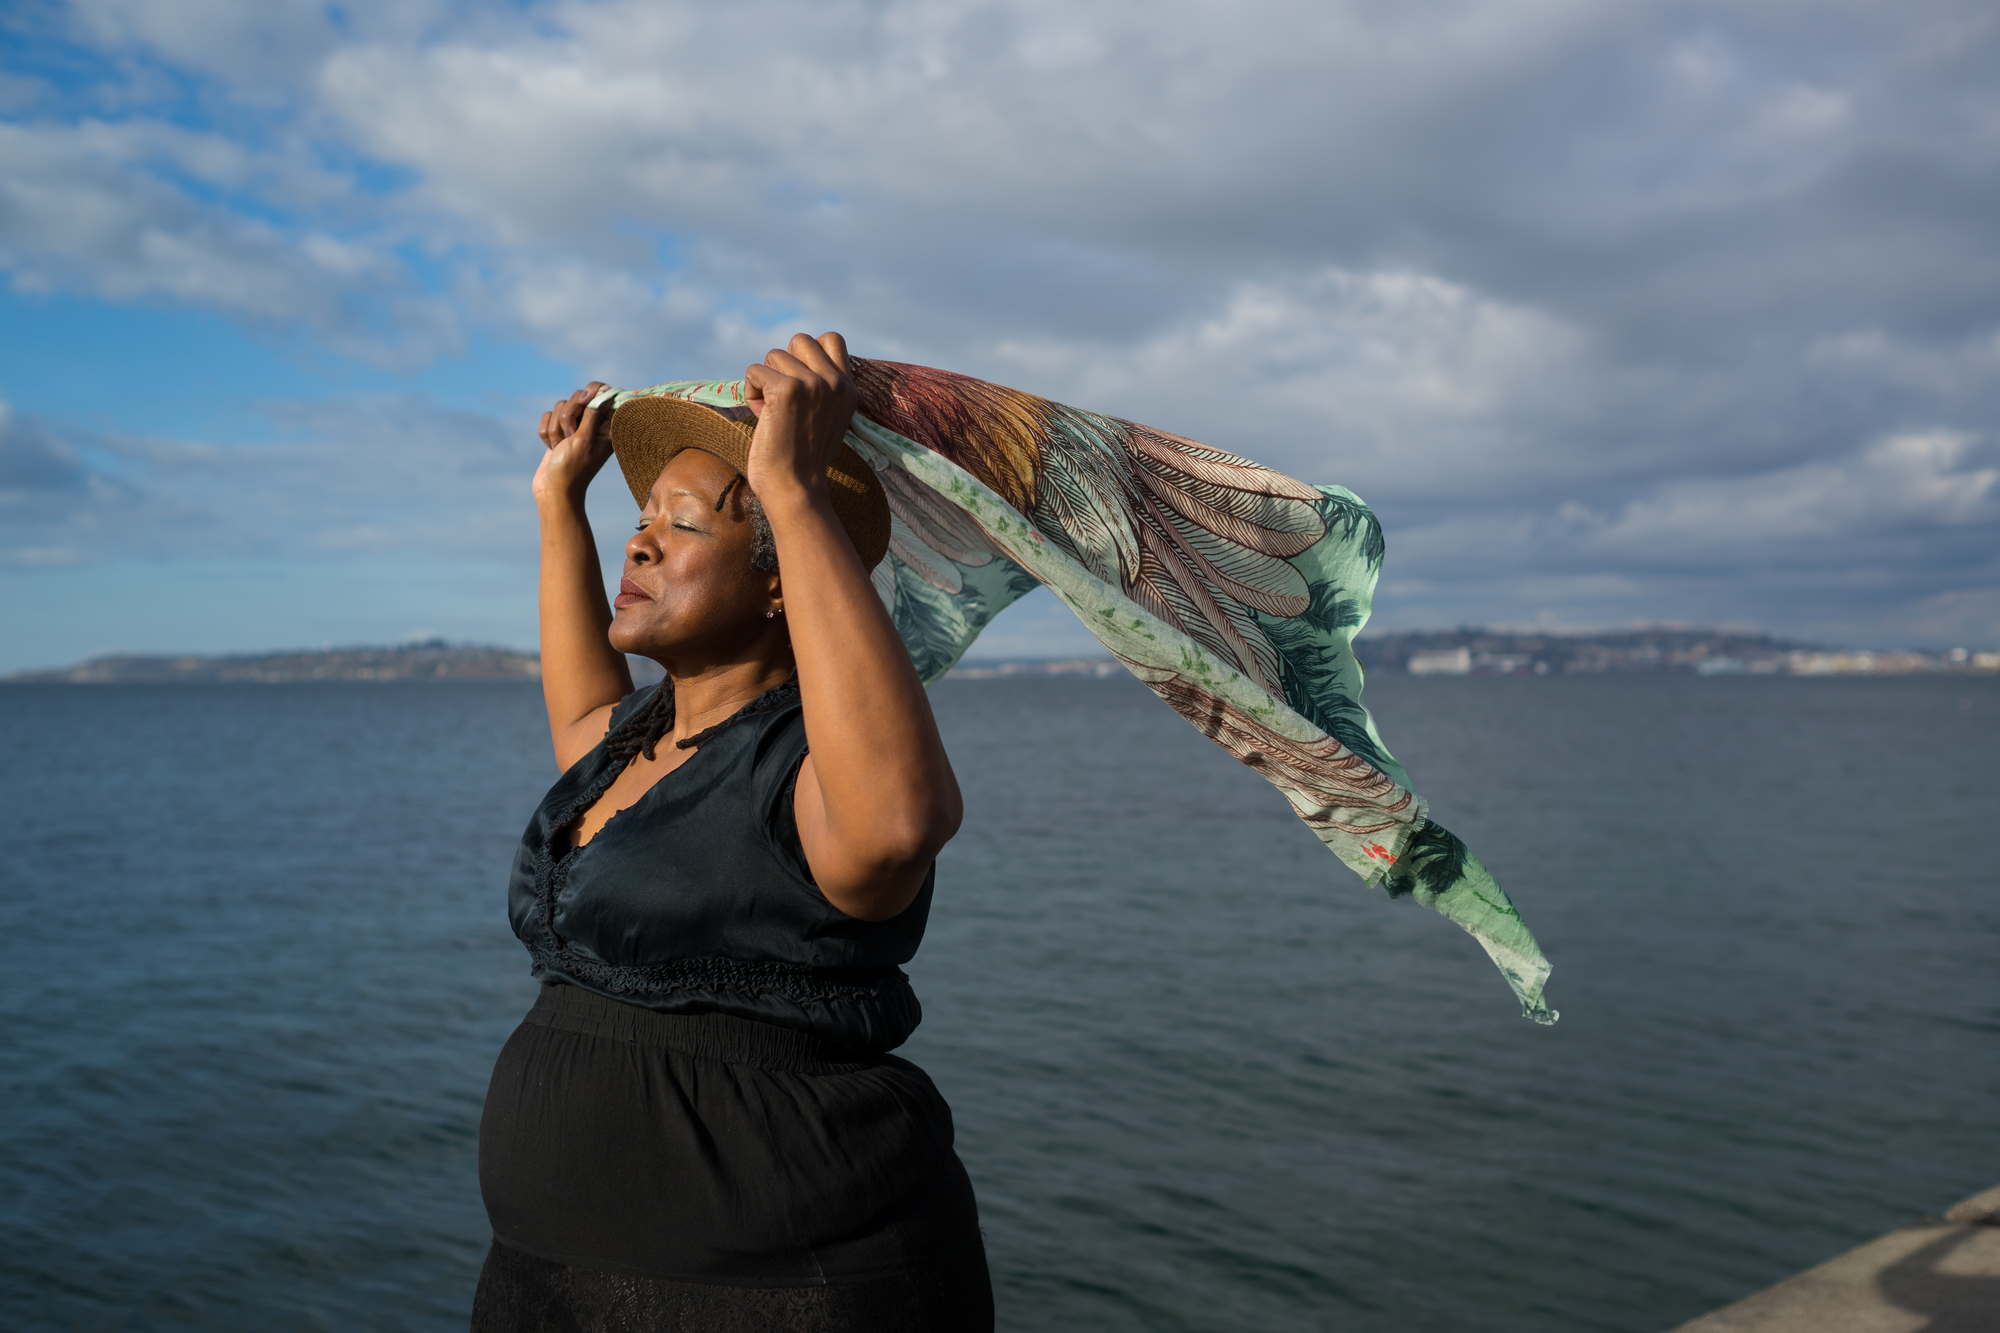 A fat Black woman poses confidently in front of a lake in Washington